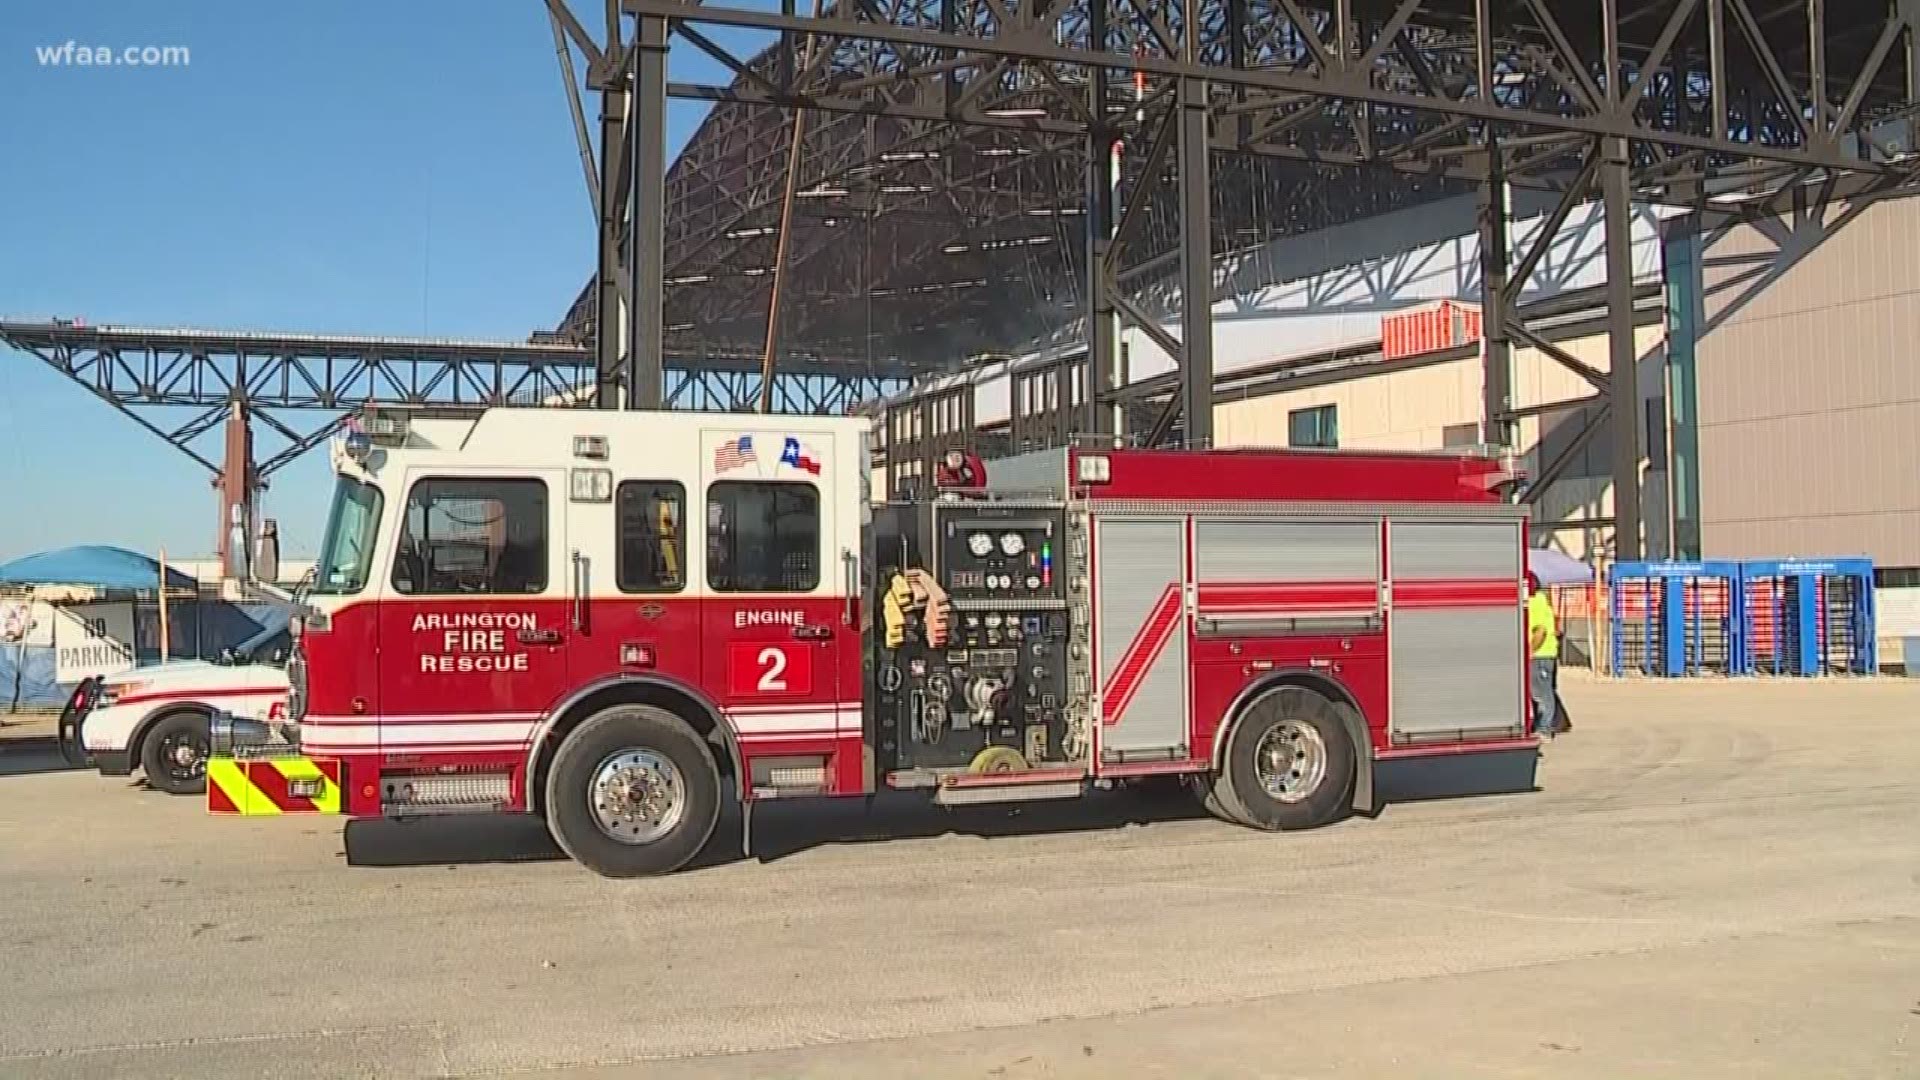 Investigators say a spark from a welder led to a fire Saturday afternoon at Globe Life Field.